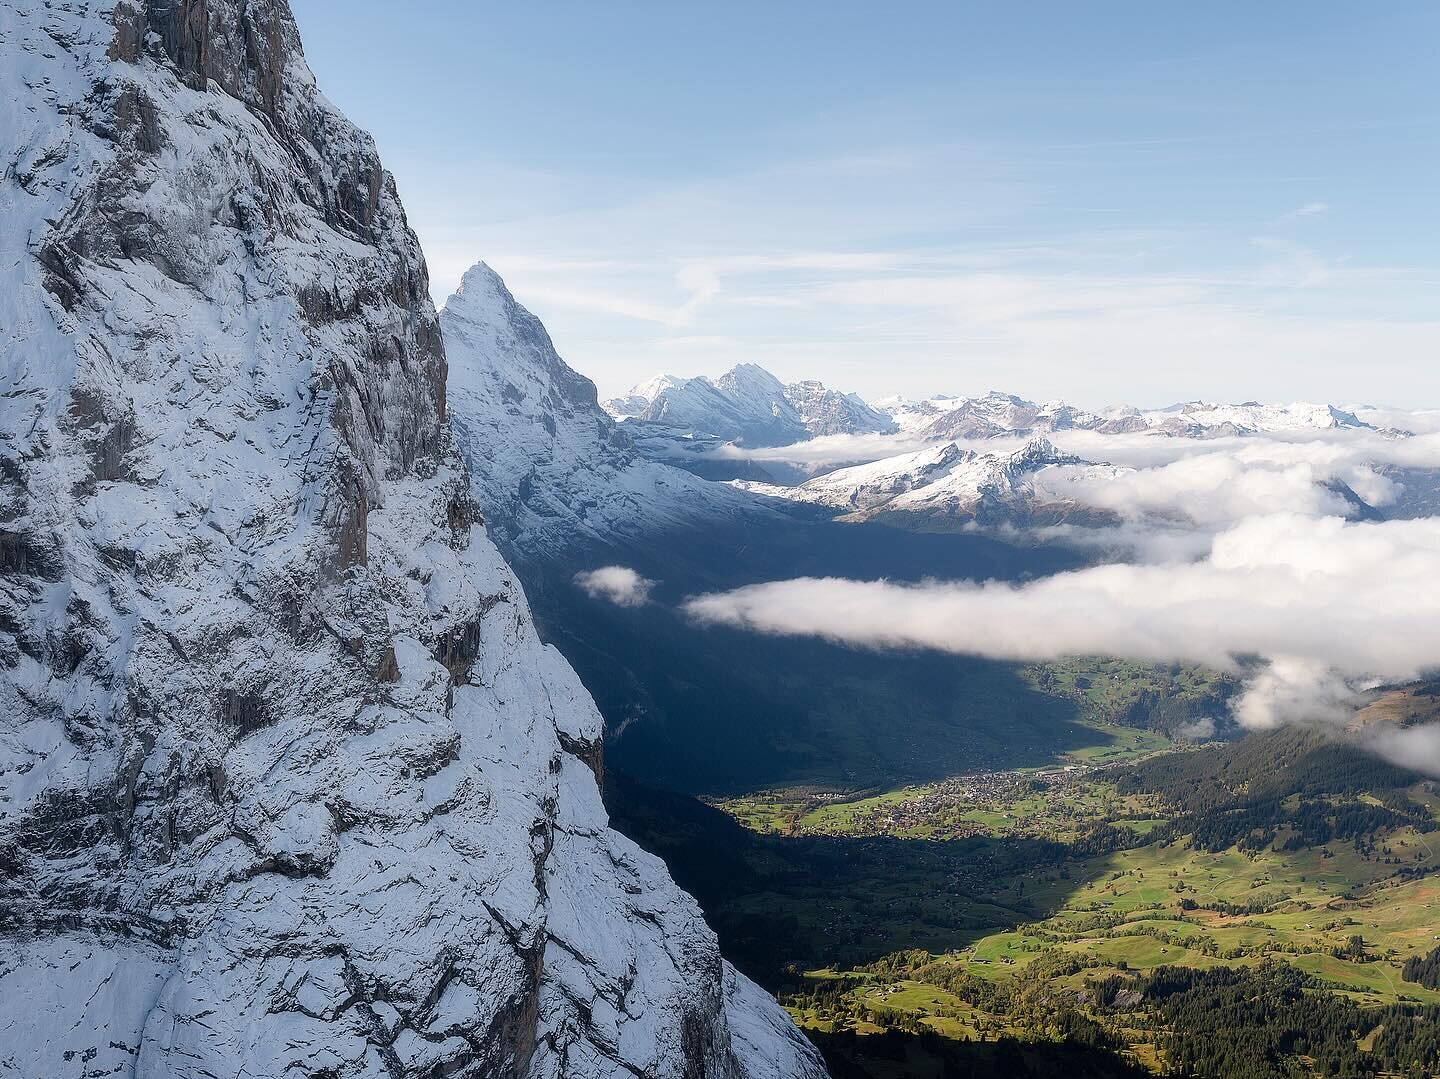 Grindelwald. So close you can reach out and touch the cliff face, there is Eiger&rsquo;s North Face playing hide and seek. 

@sky_trotter epic piloting skills! ✈️